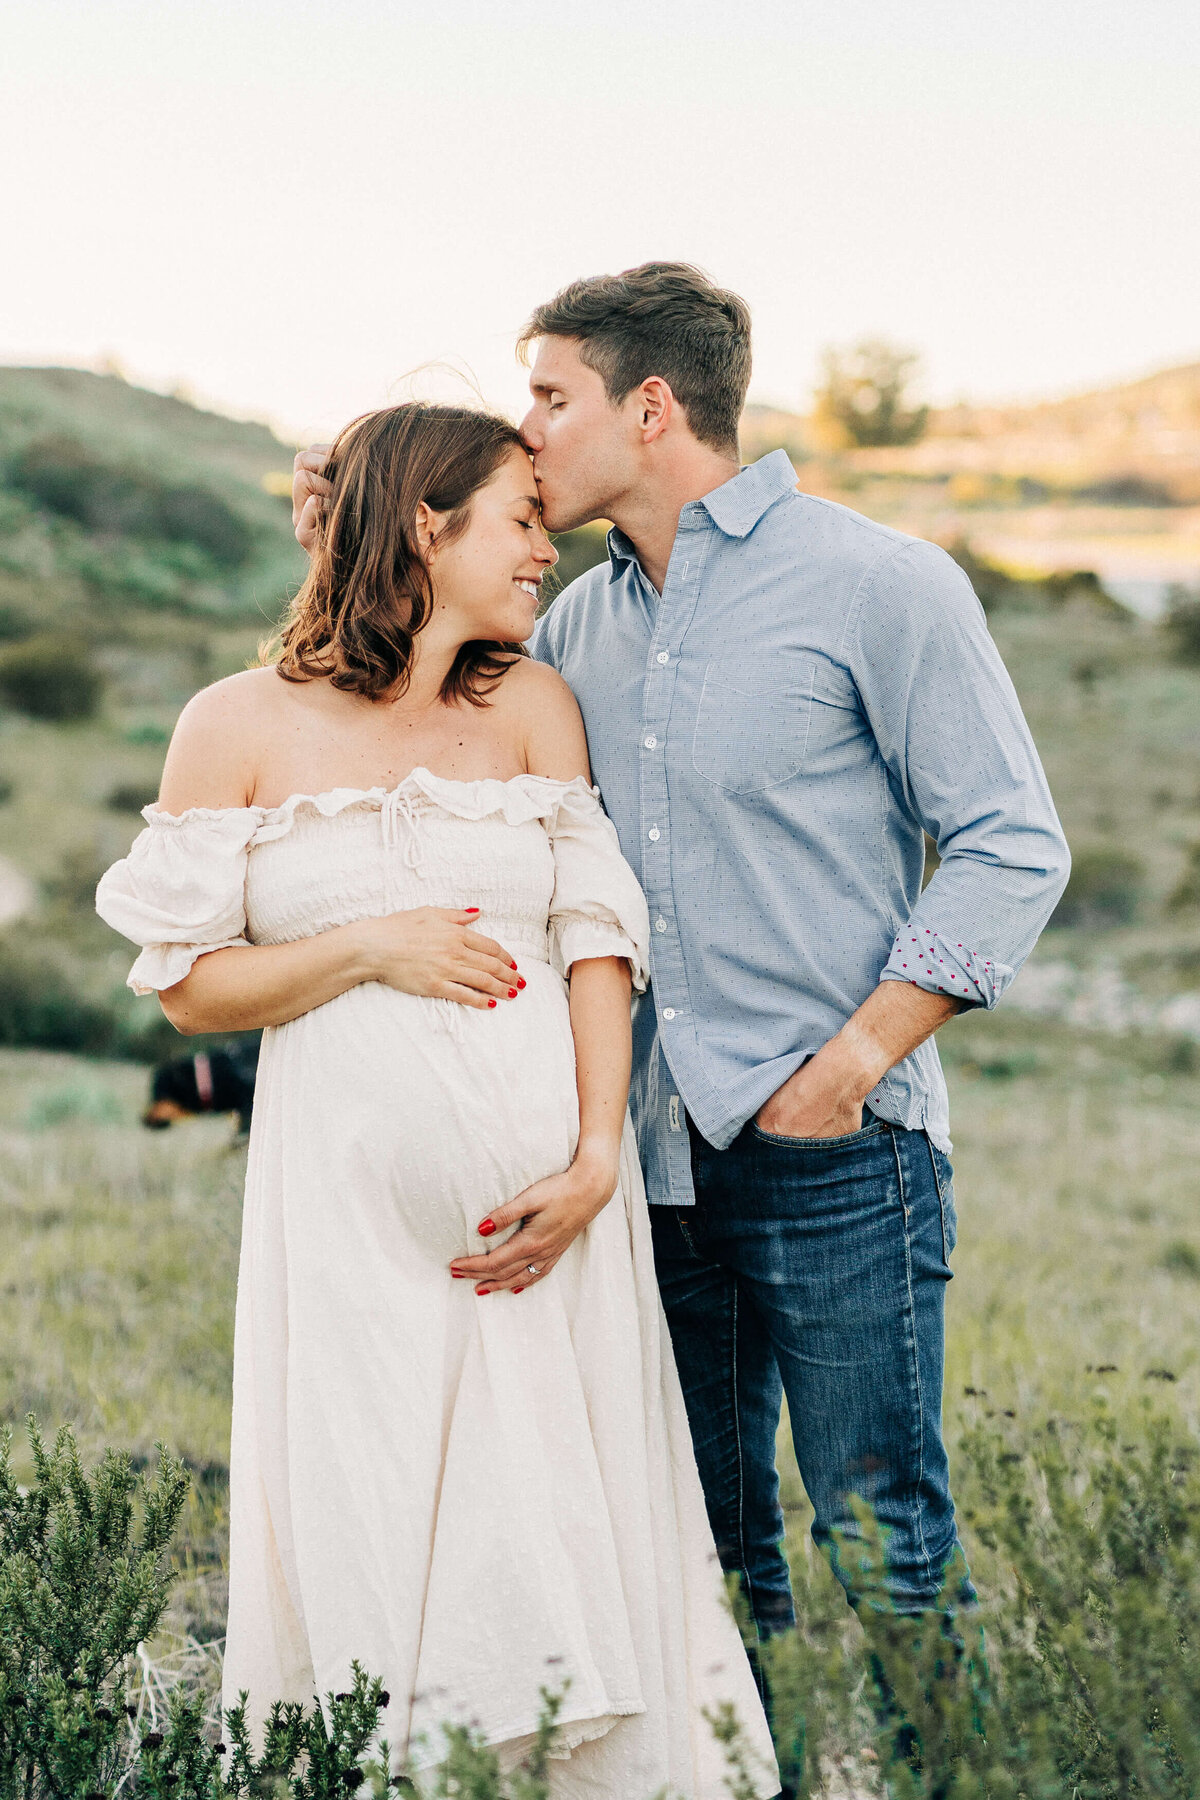 La Vie Photography - Maternity photos don't have to just be solo portraits  - you can also include some pictures with your loving partner! We want  every family to look back at